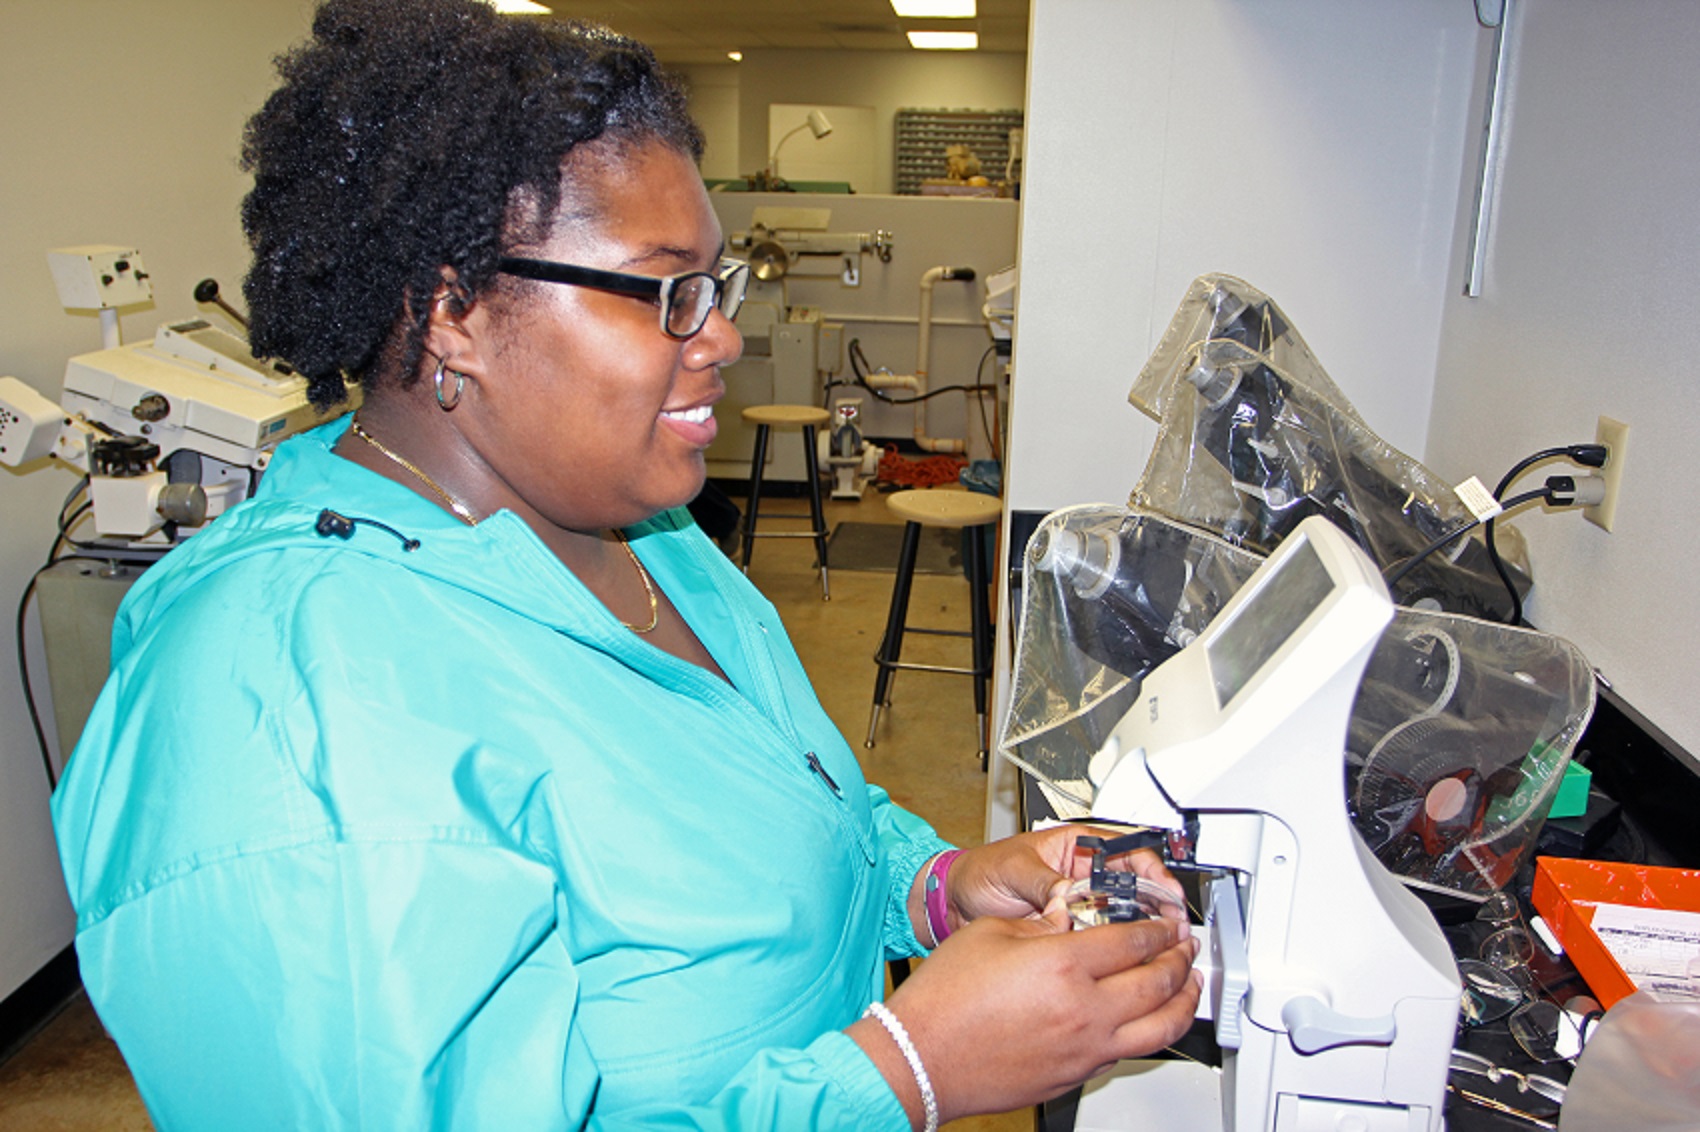 EMCC’s Ophthalmic Technology program is currently working on an order of more than 100 pairs of eyeglasses which will be given to those in need on an upcoming mission trip to Haiti by Shared Vision International.